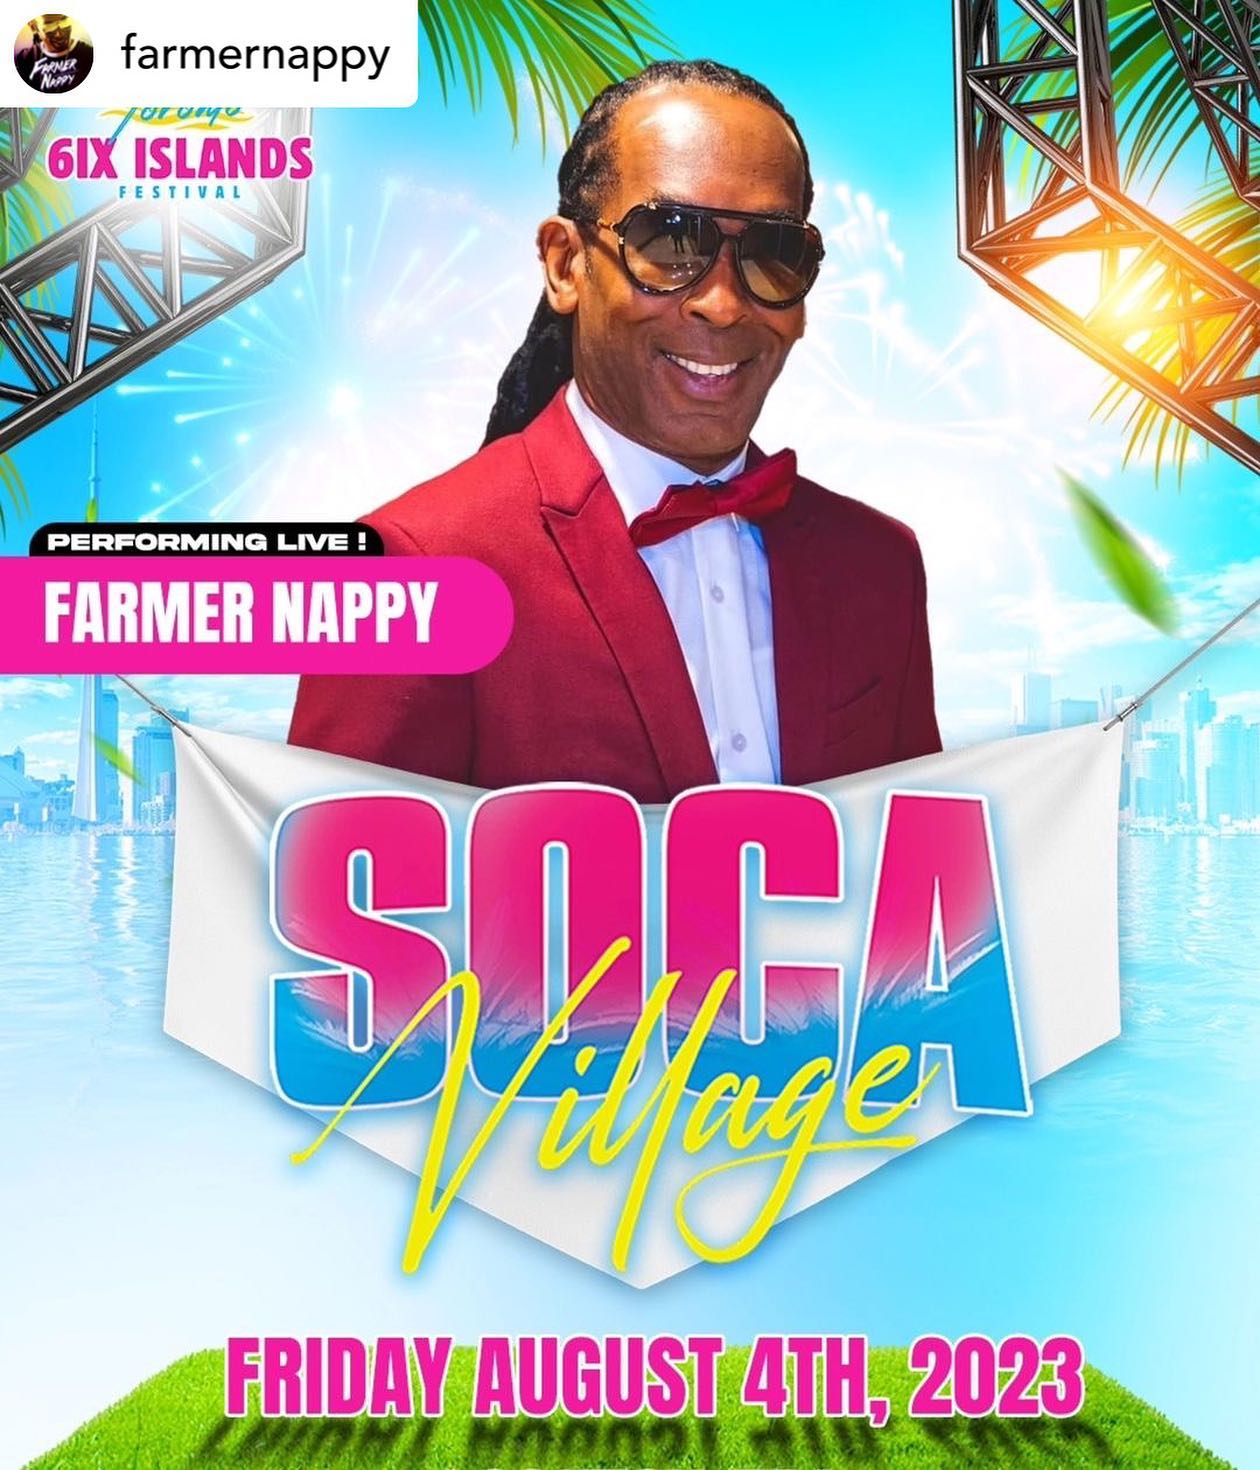 Toronto 🇨🇦🇨🇦🇨🇦 I will be coming your way next week Friday Aug 4th for SOCA VILLAGE with @6ixislands.
See you for Caribana Weekend! 🏾 🏾